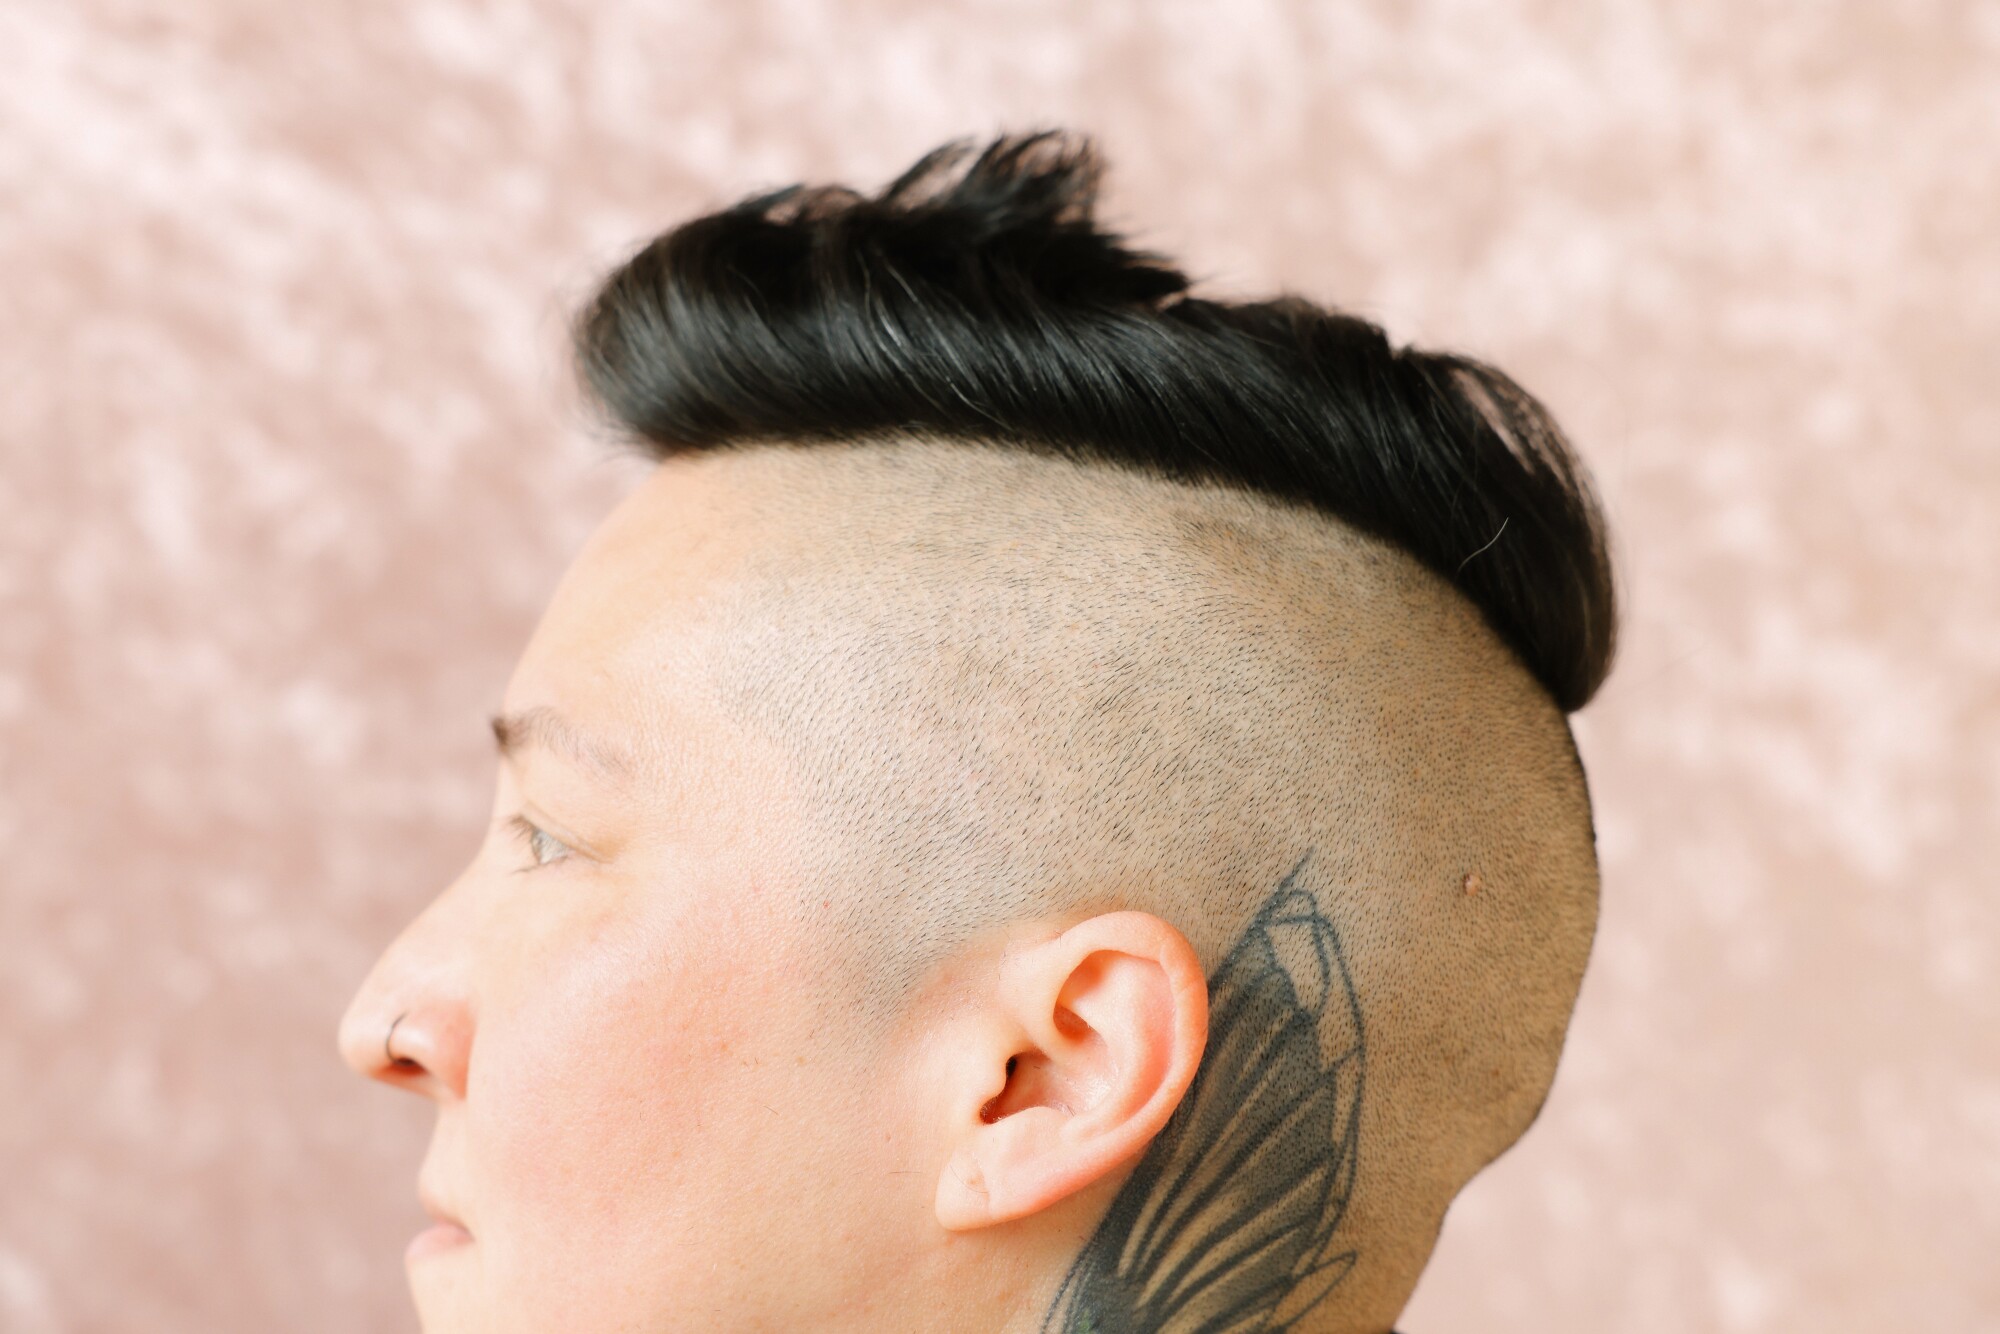 The side of a person's head has shaved hair, long hair on top and a tattoo near the ear